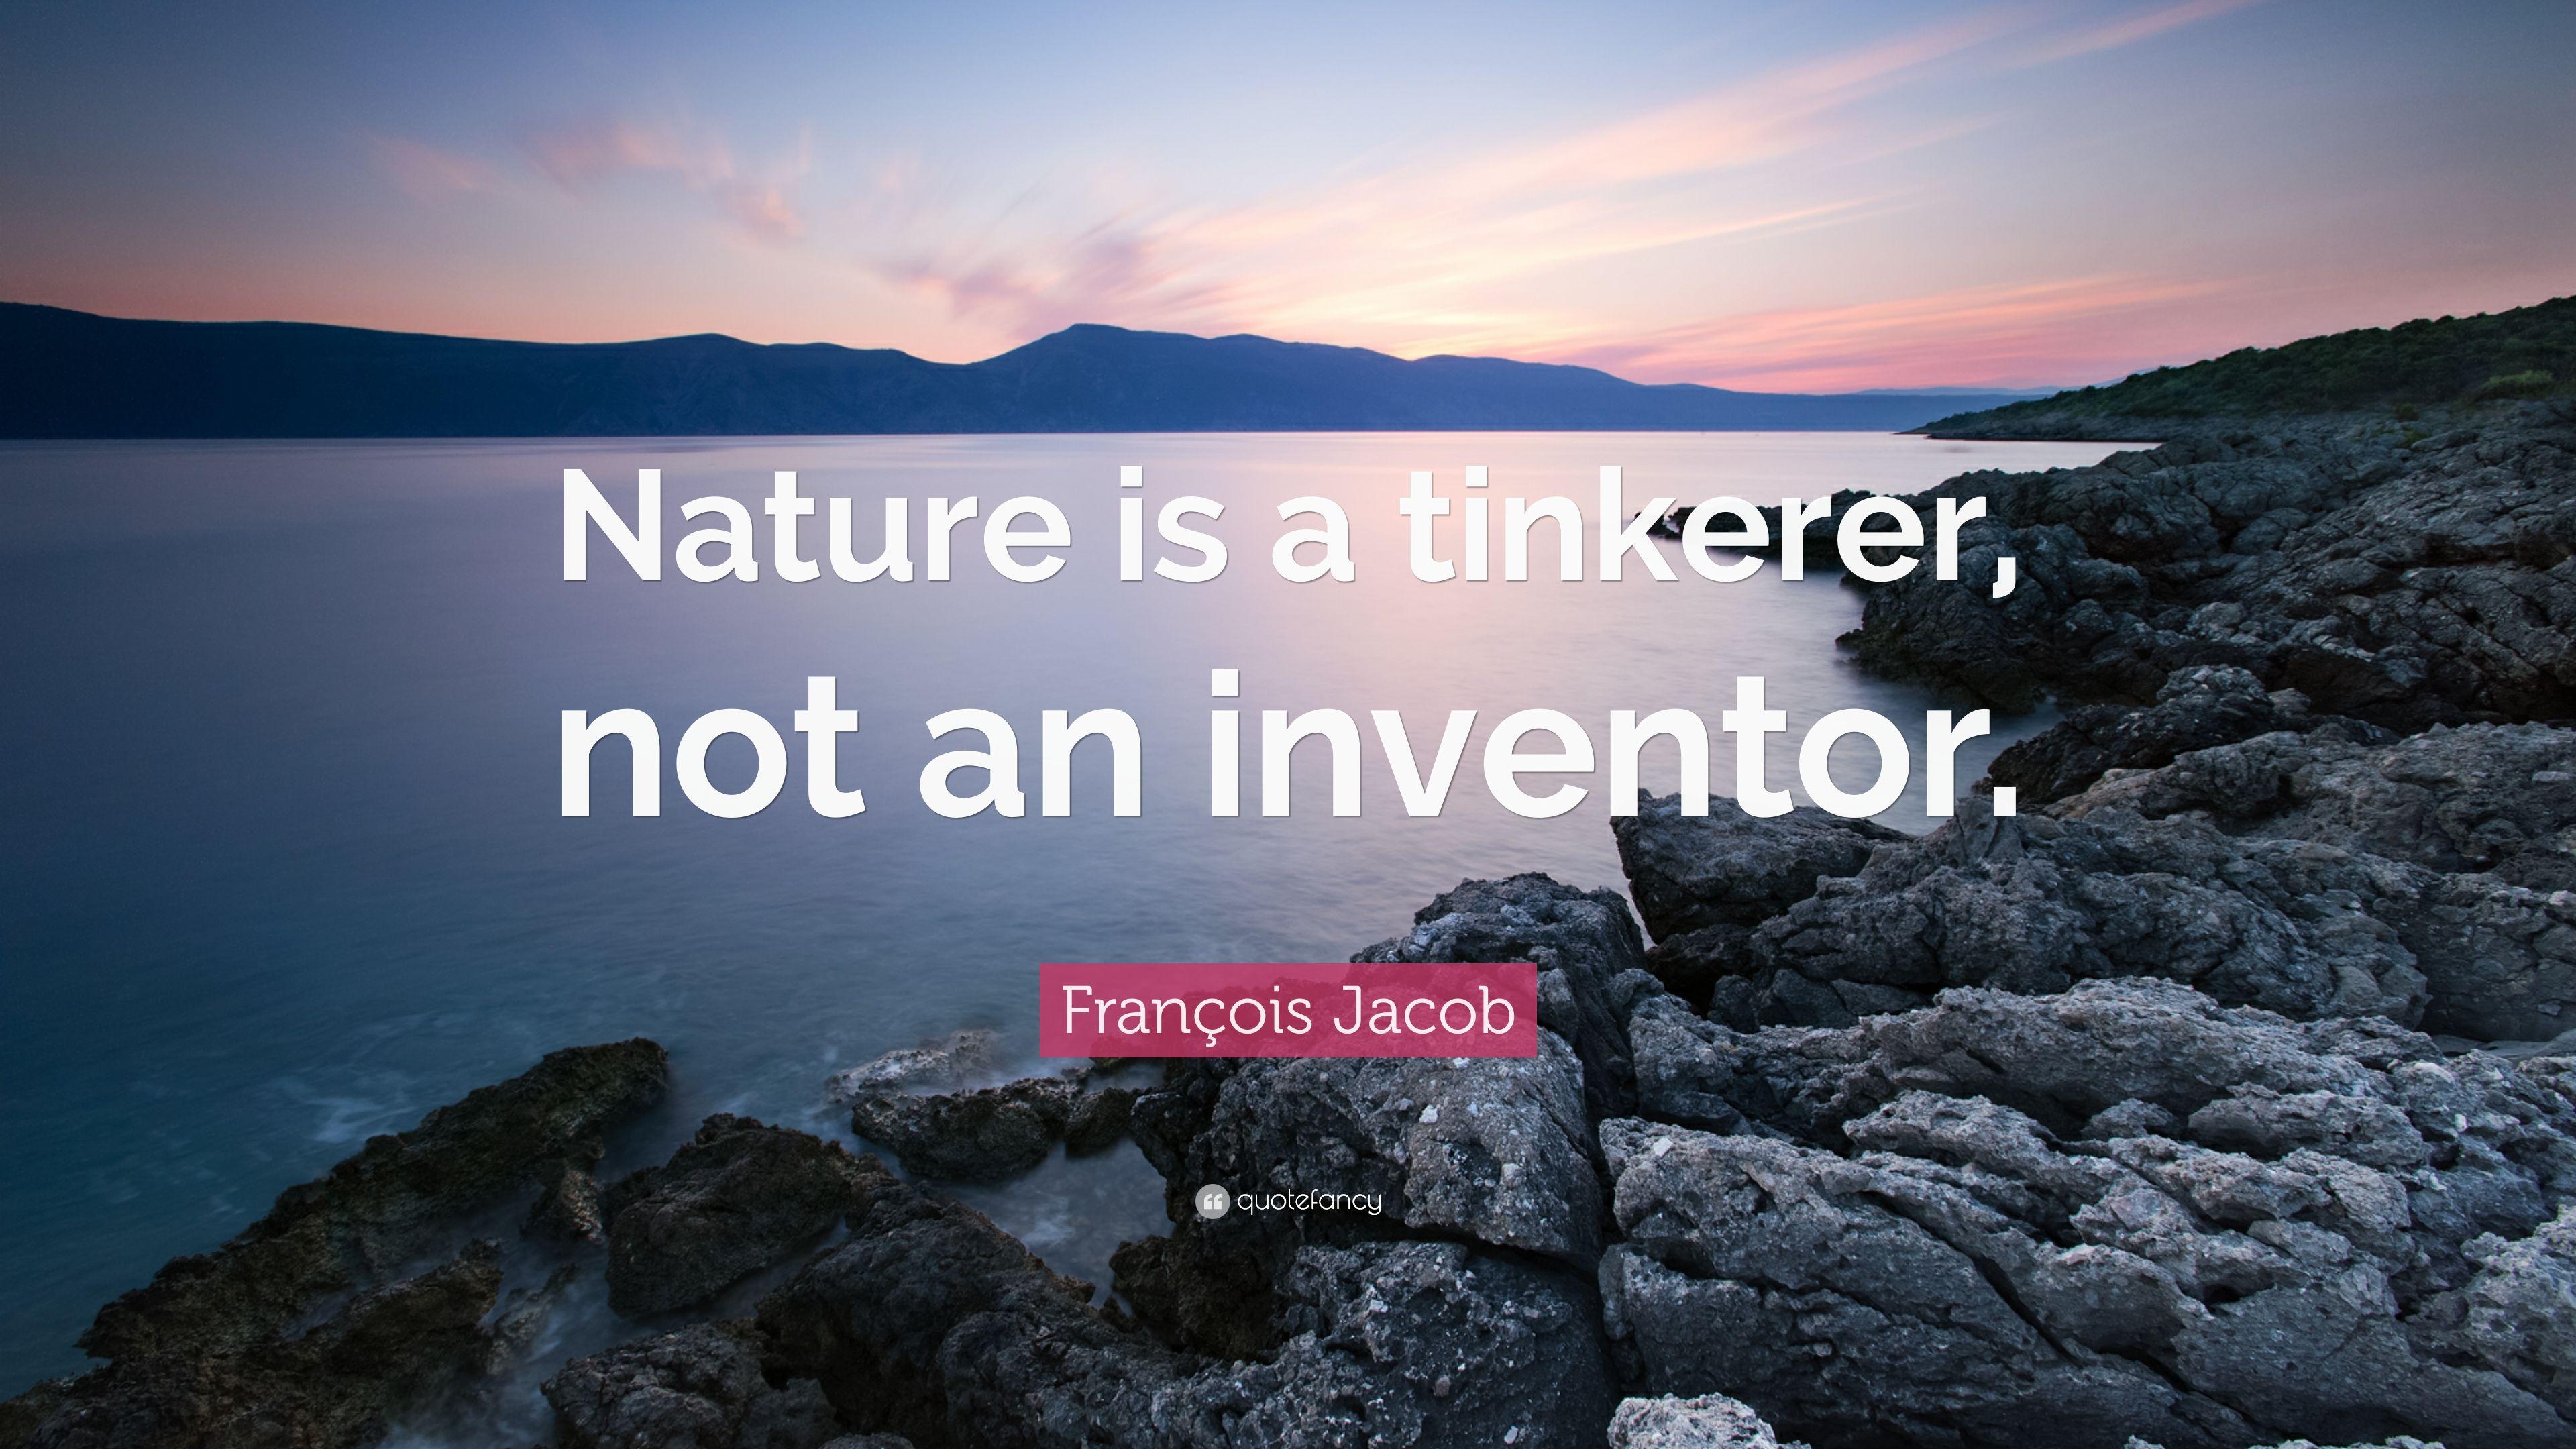 François Jacob Quote: “Nature is a tinkerer, not an inventor.” 7